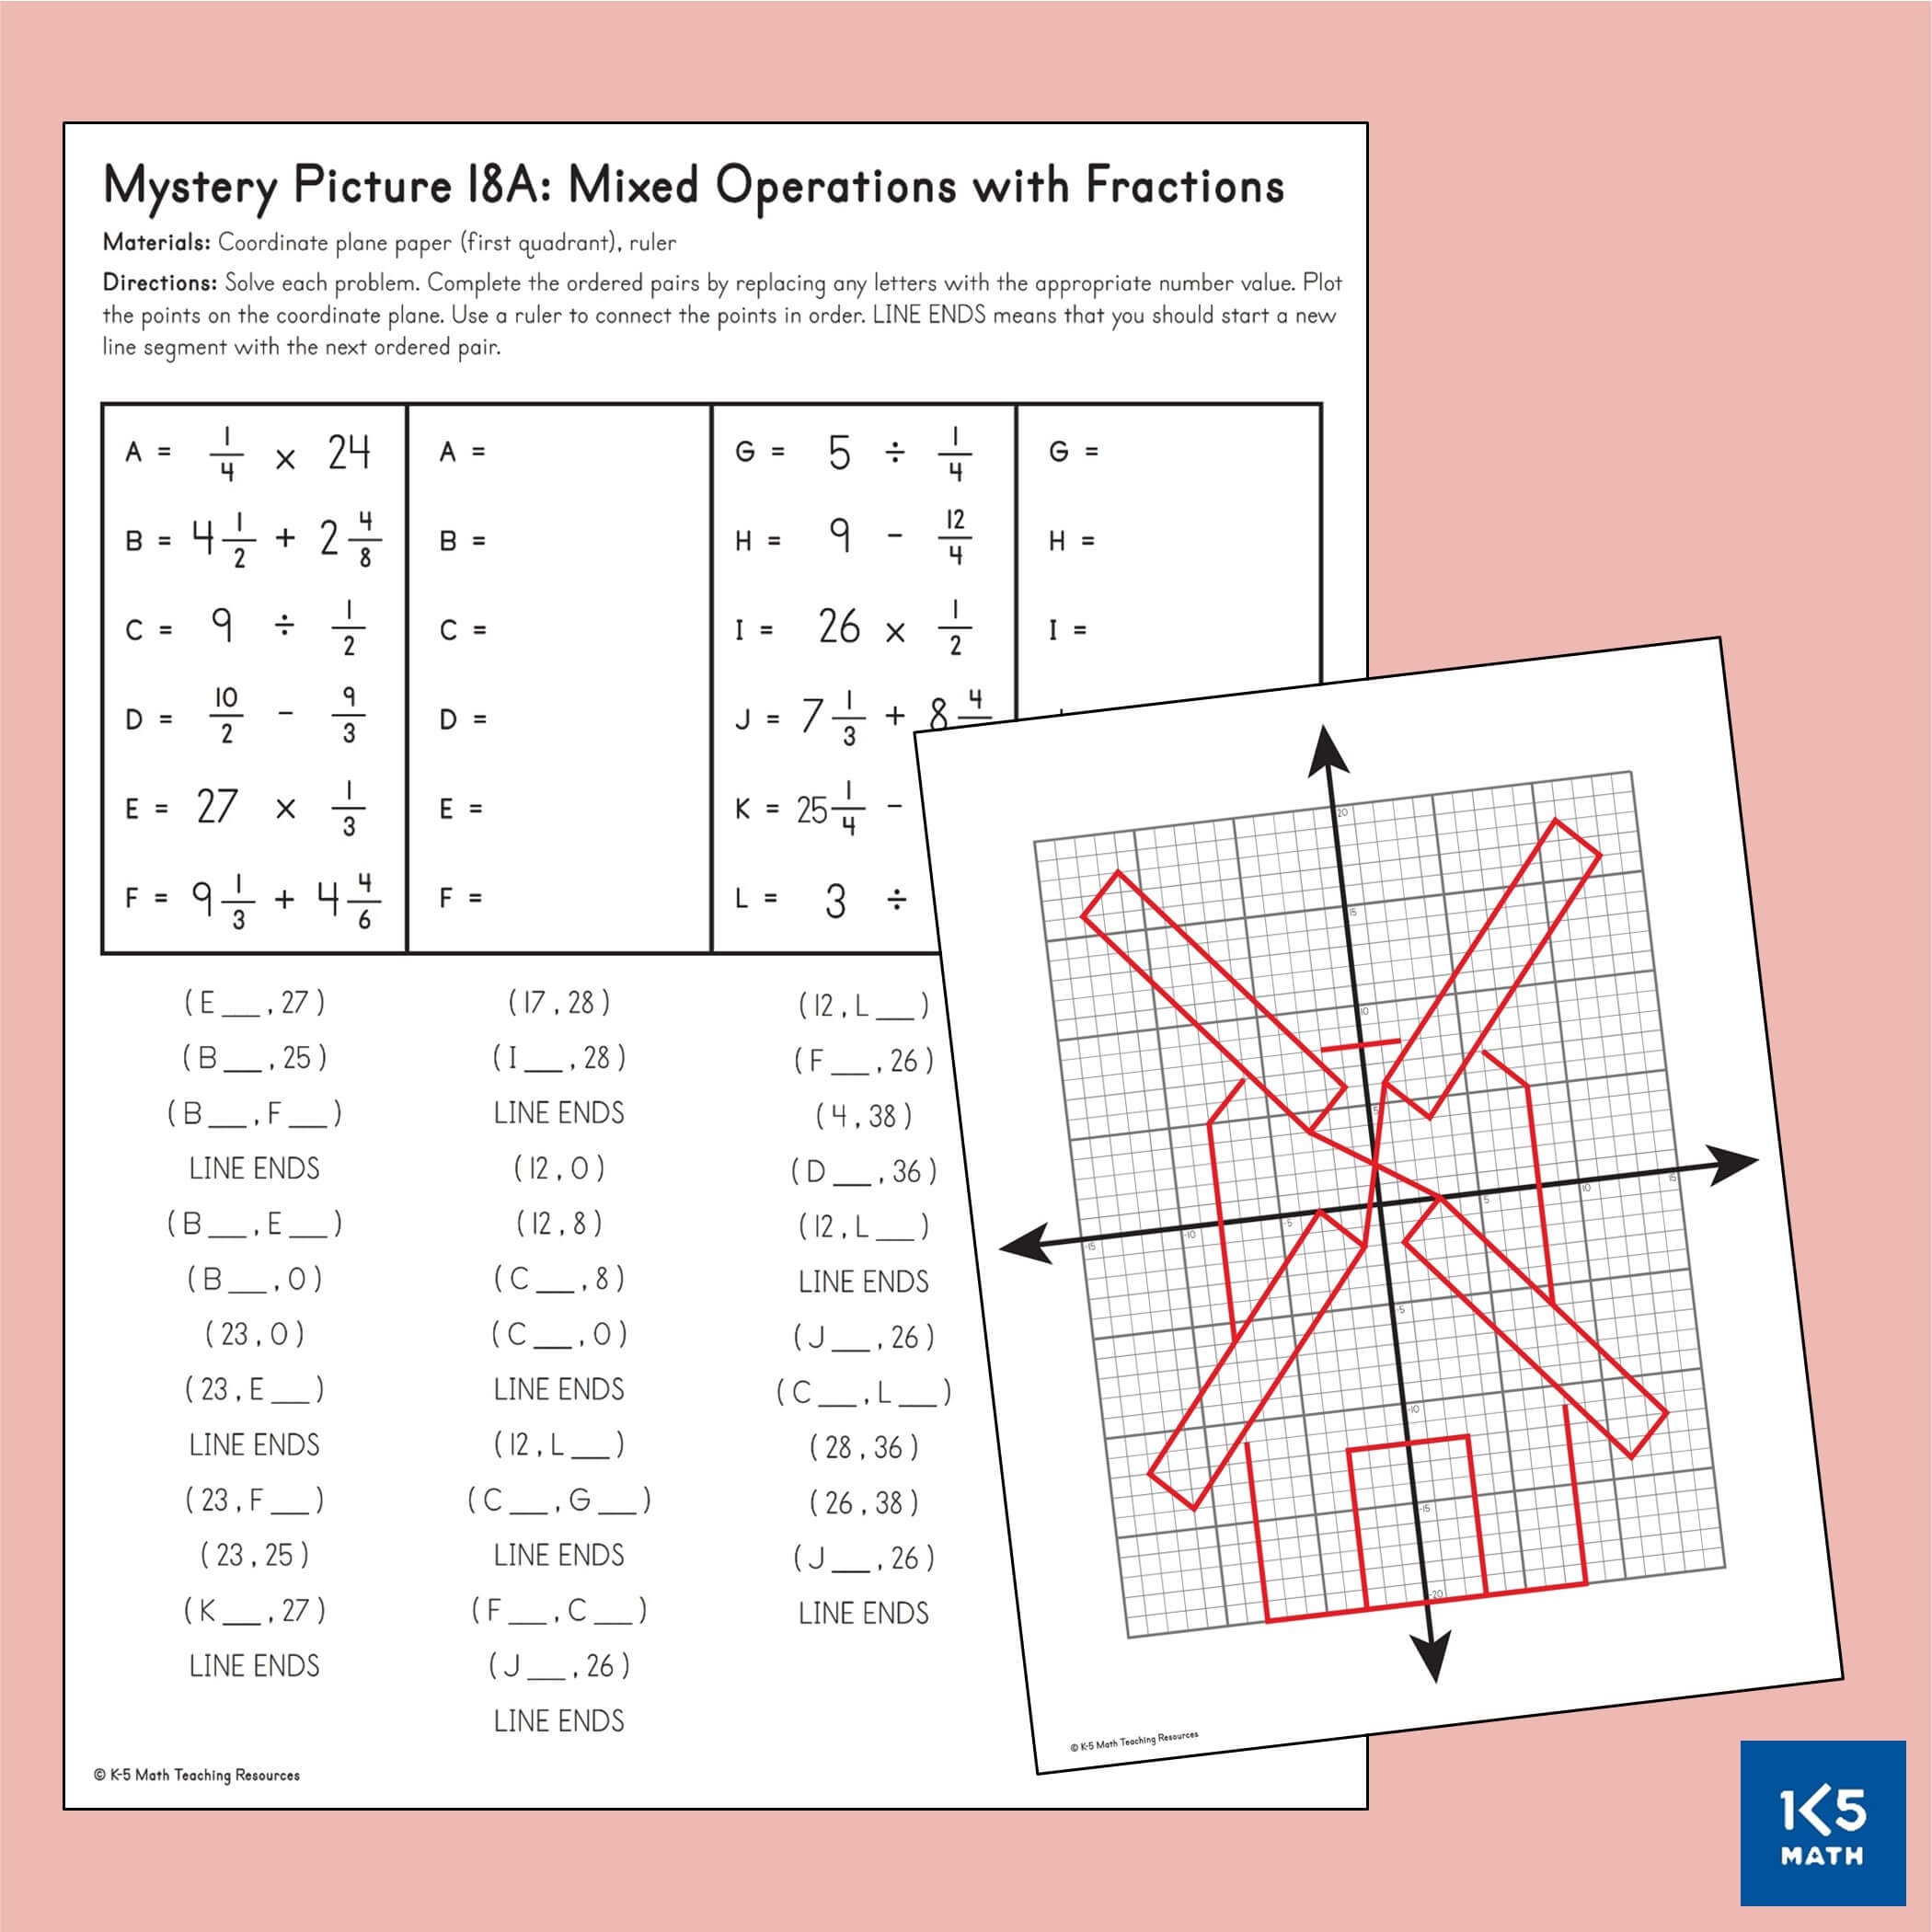 coordinate grid pictures with numbers